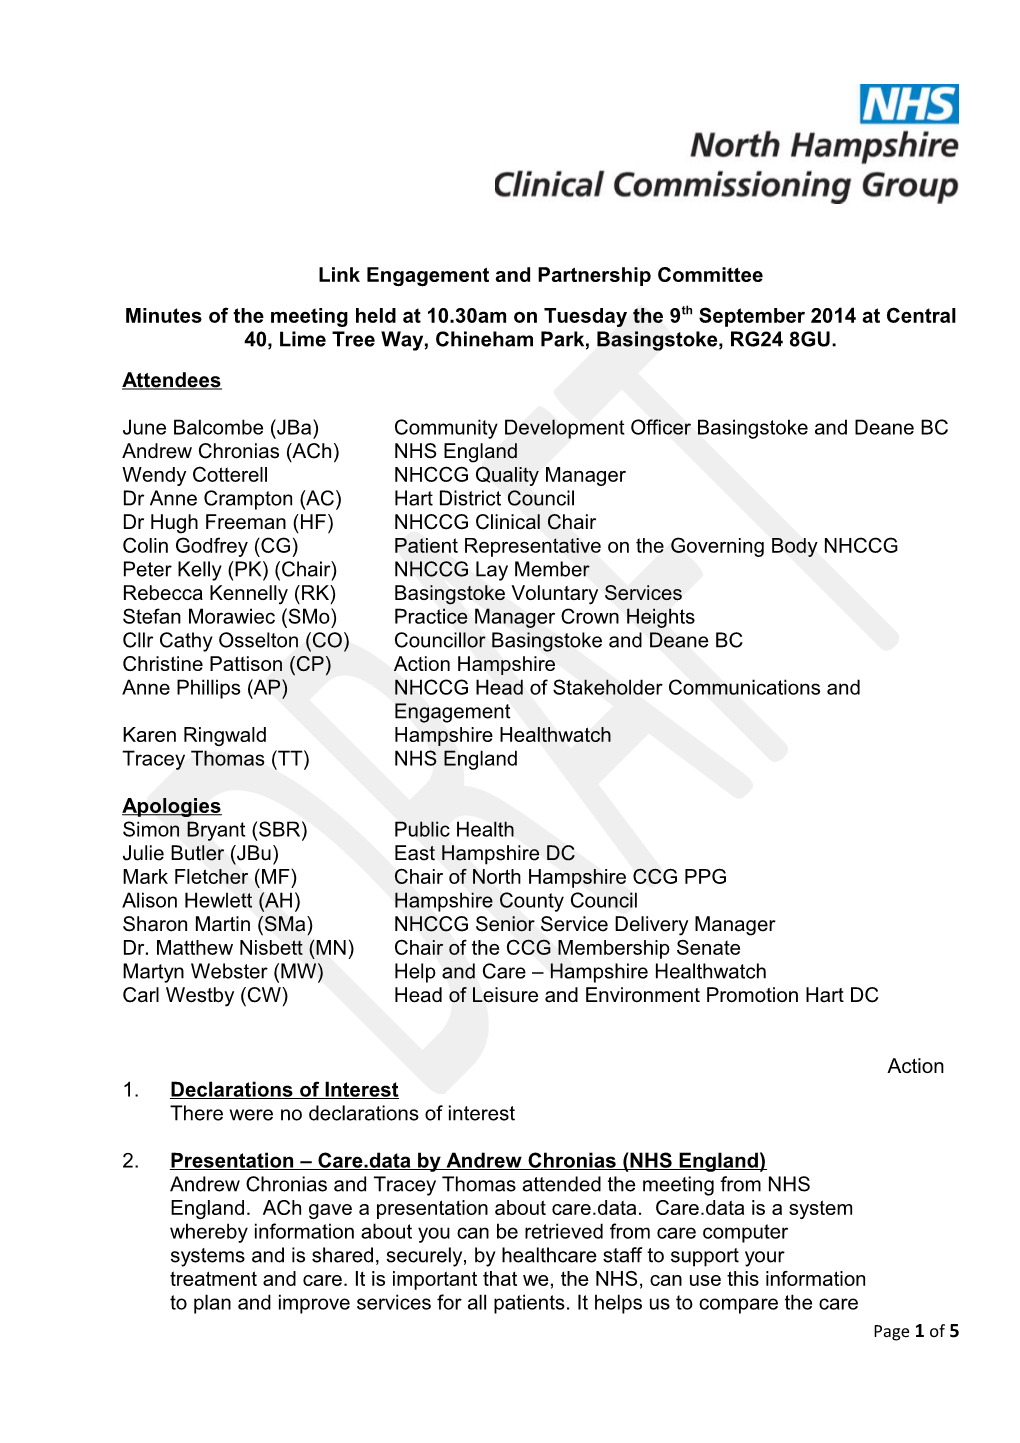 Link Engagement and Partnership Committee